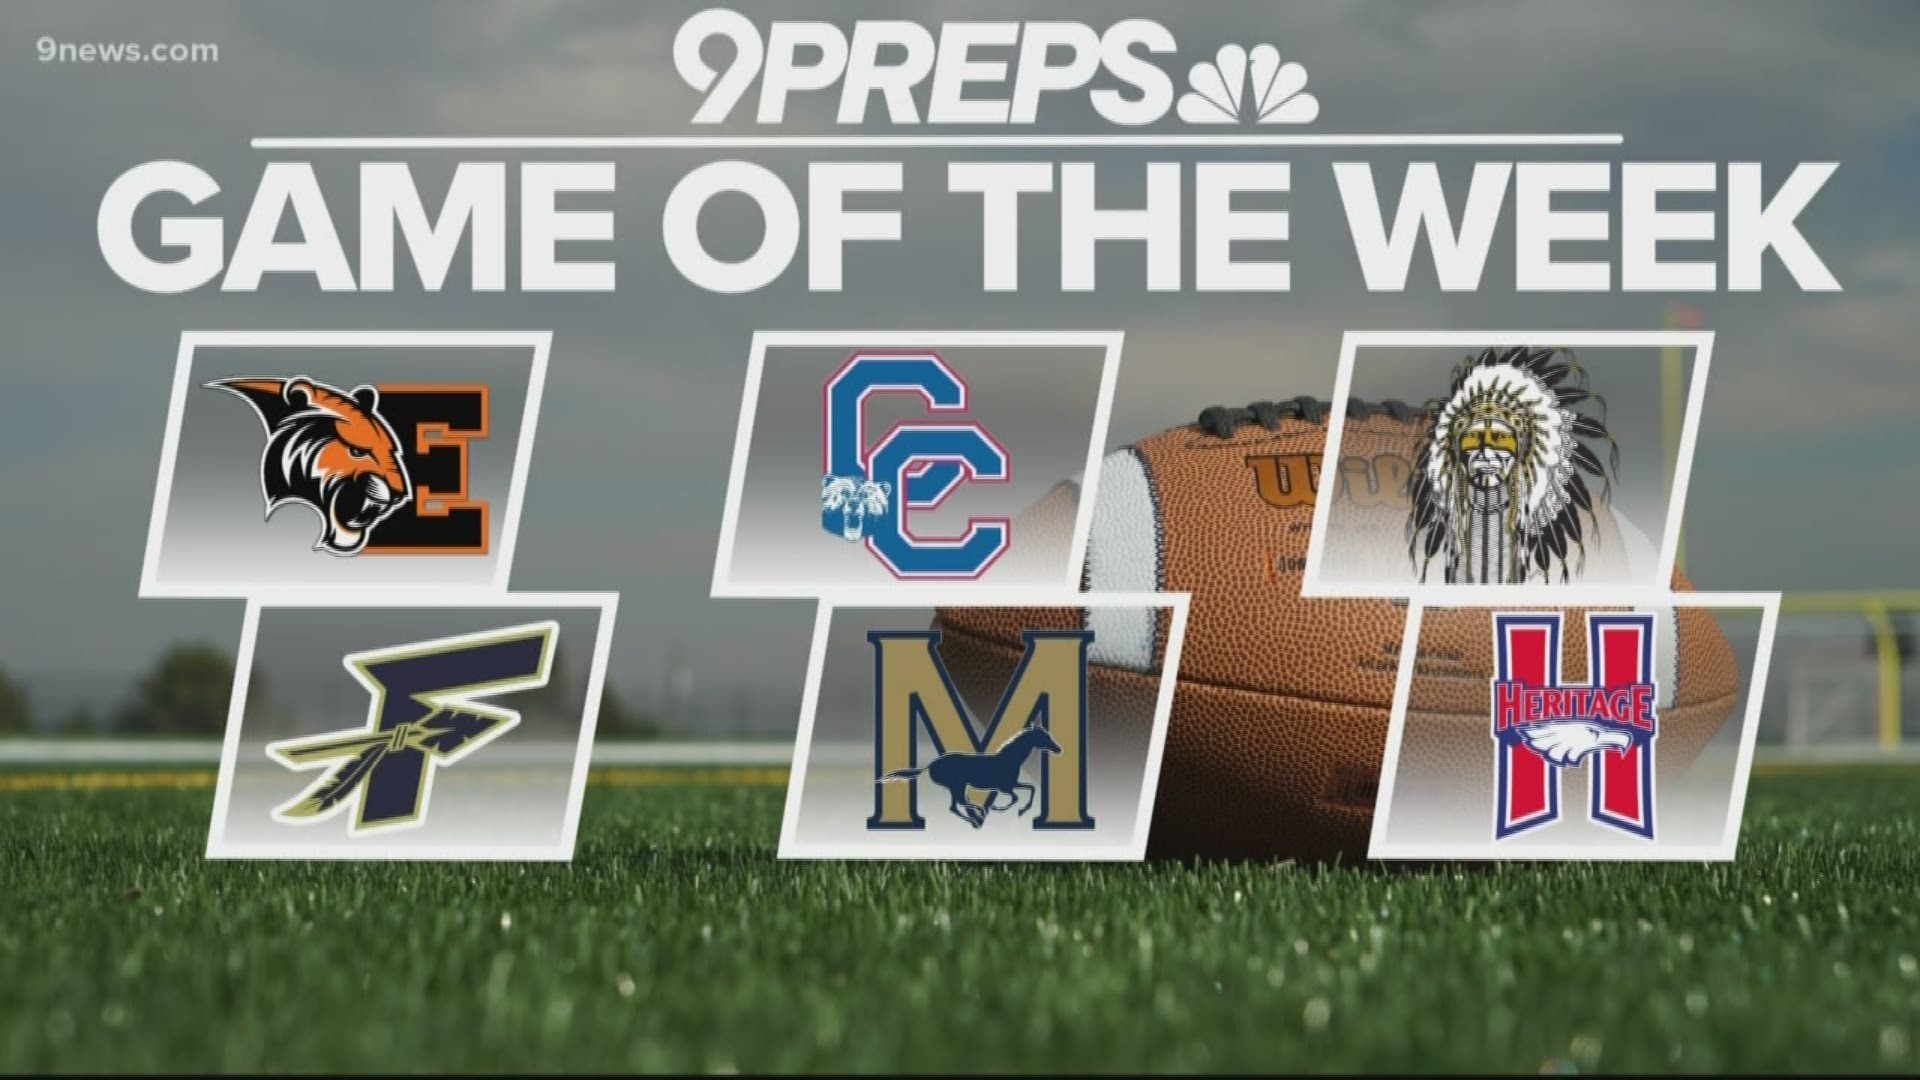 The game of the week nominees are revealed.